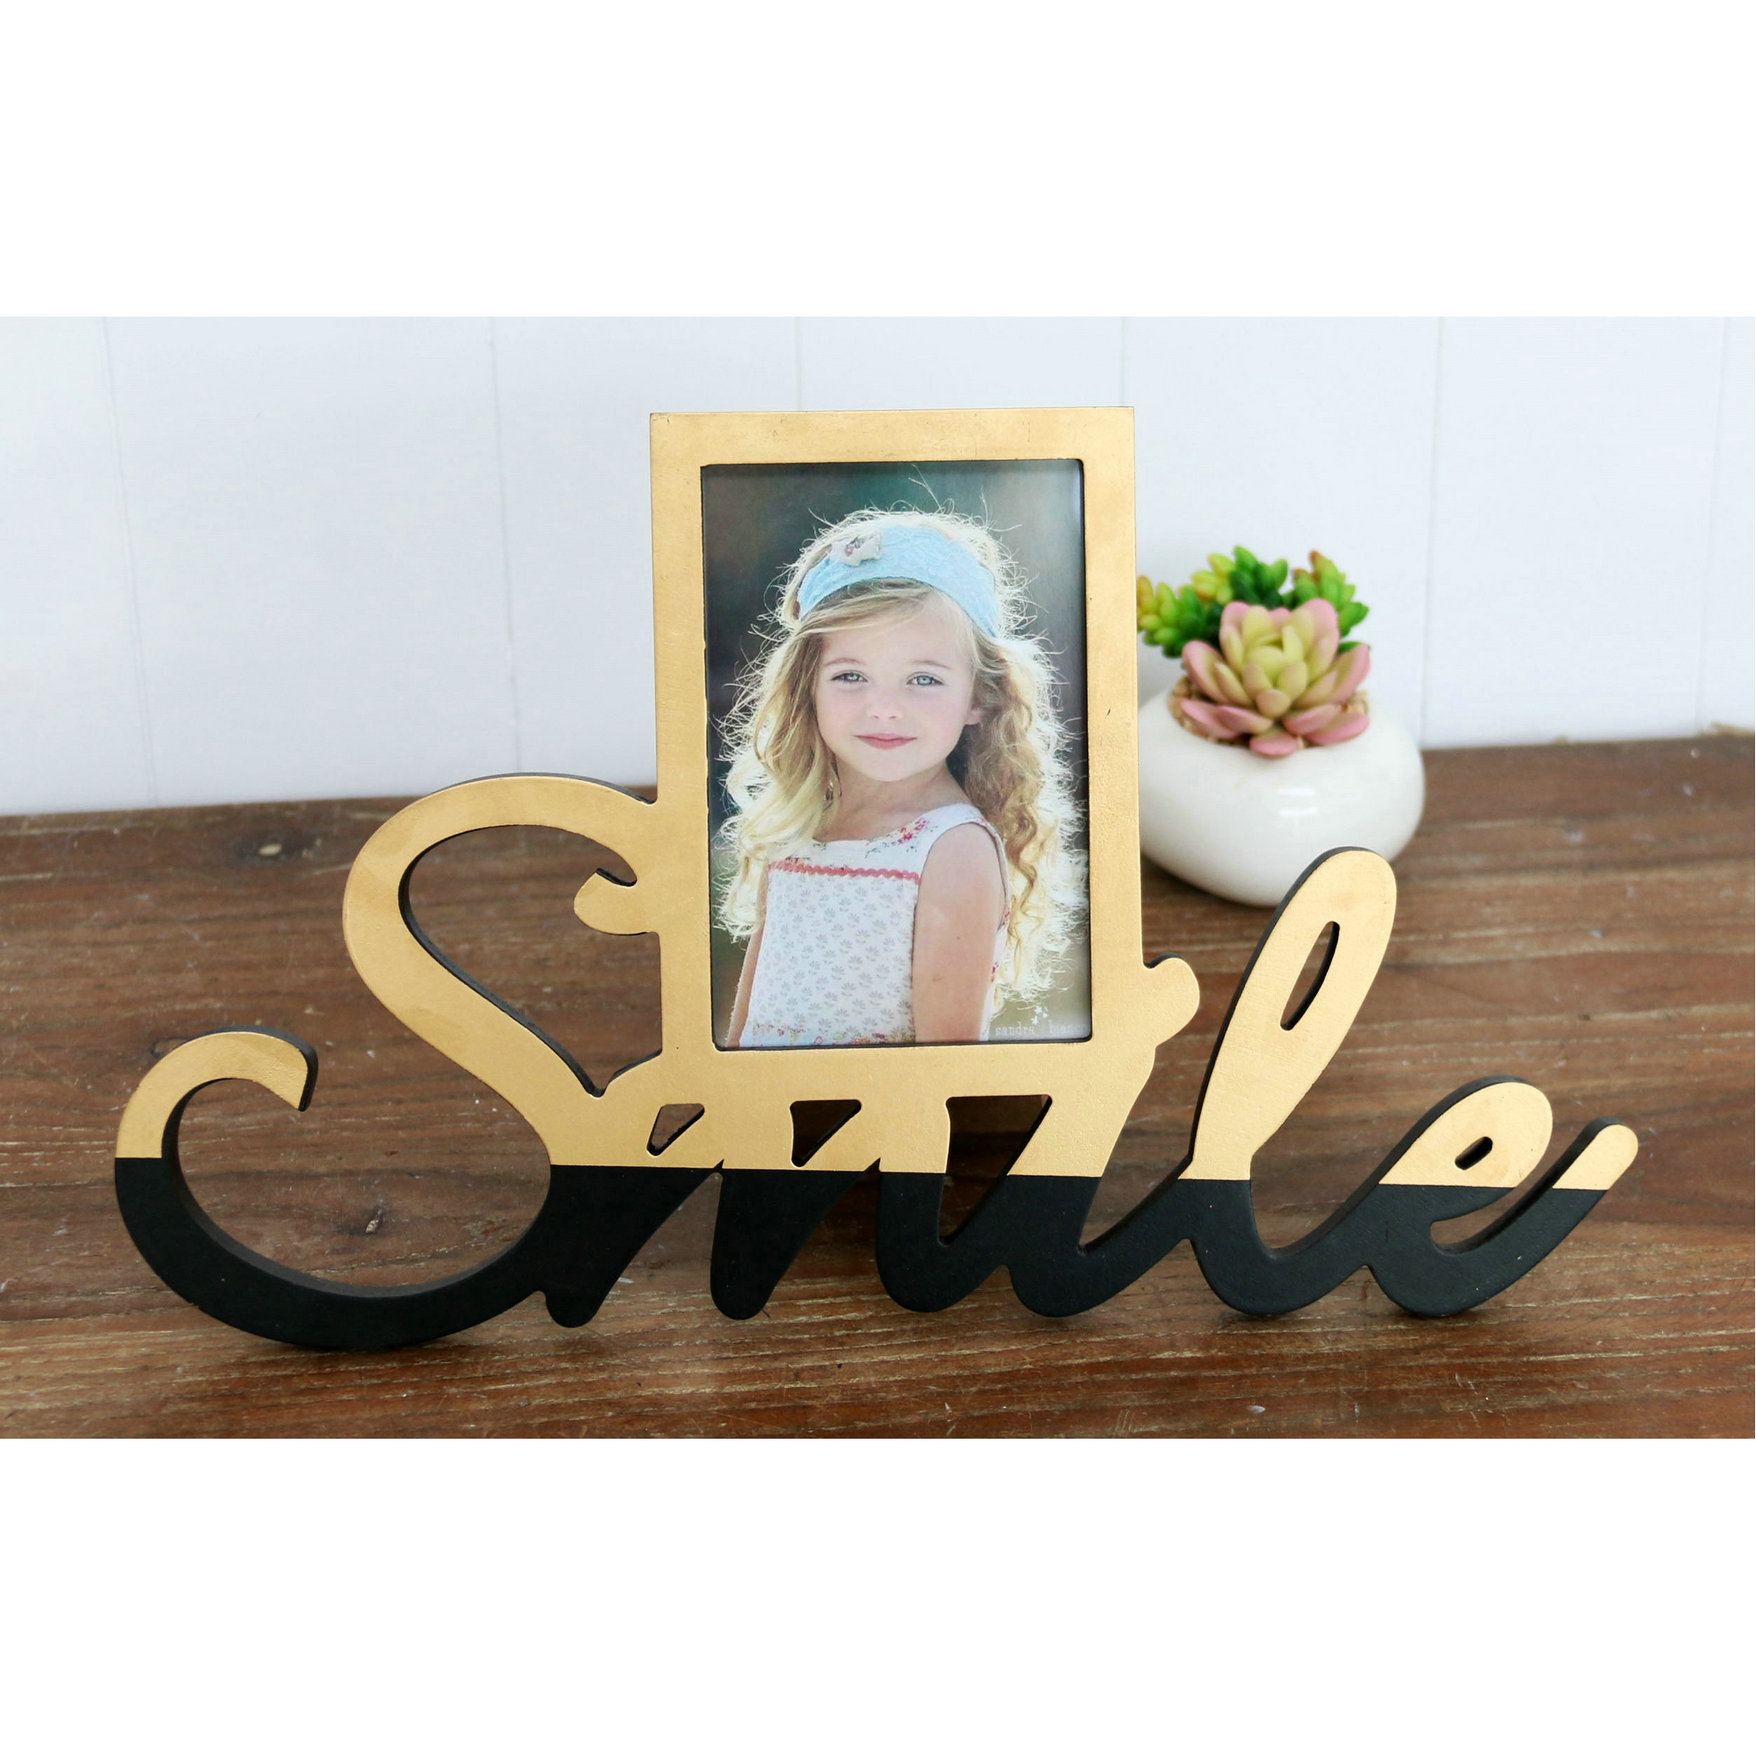 FU-21744  Wood letter with frame 37x22x1.5cm